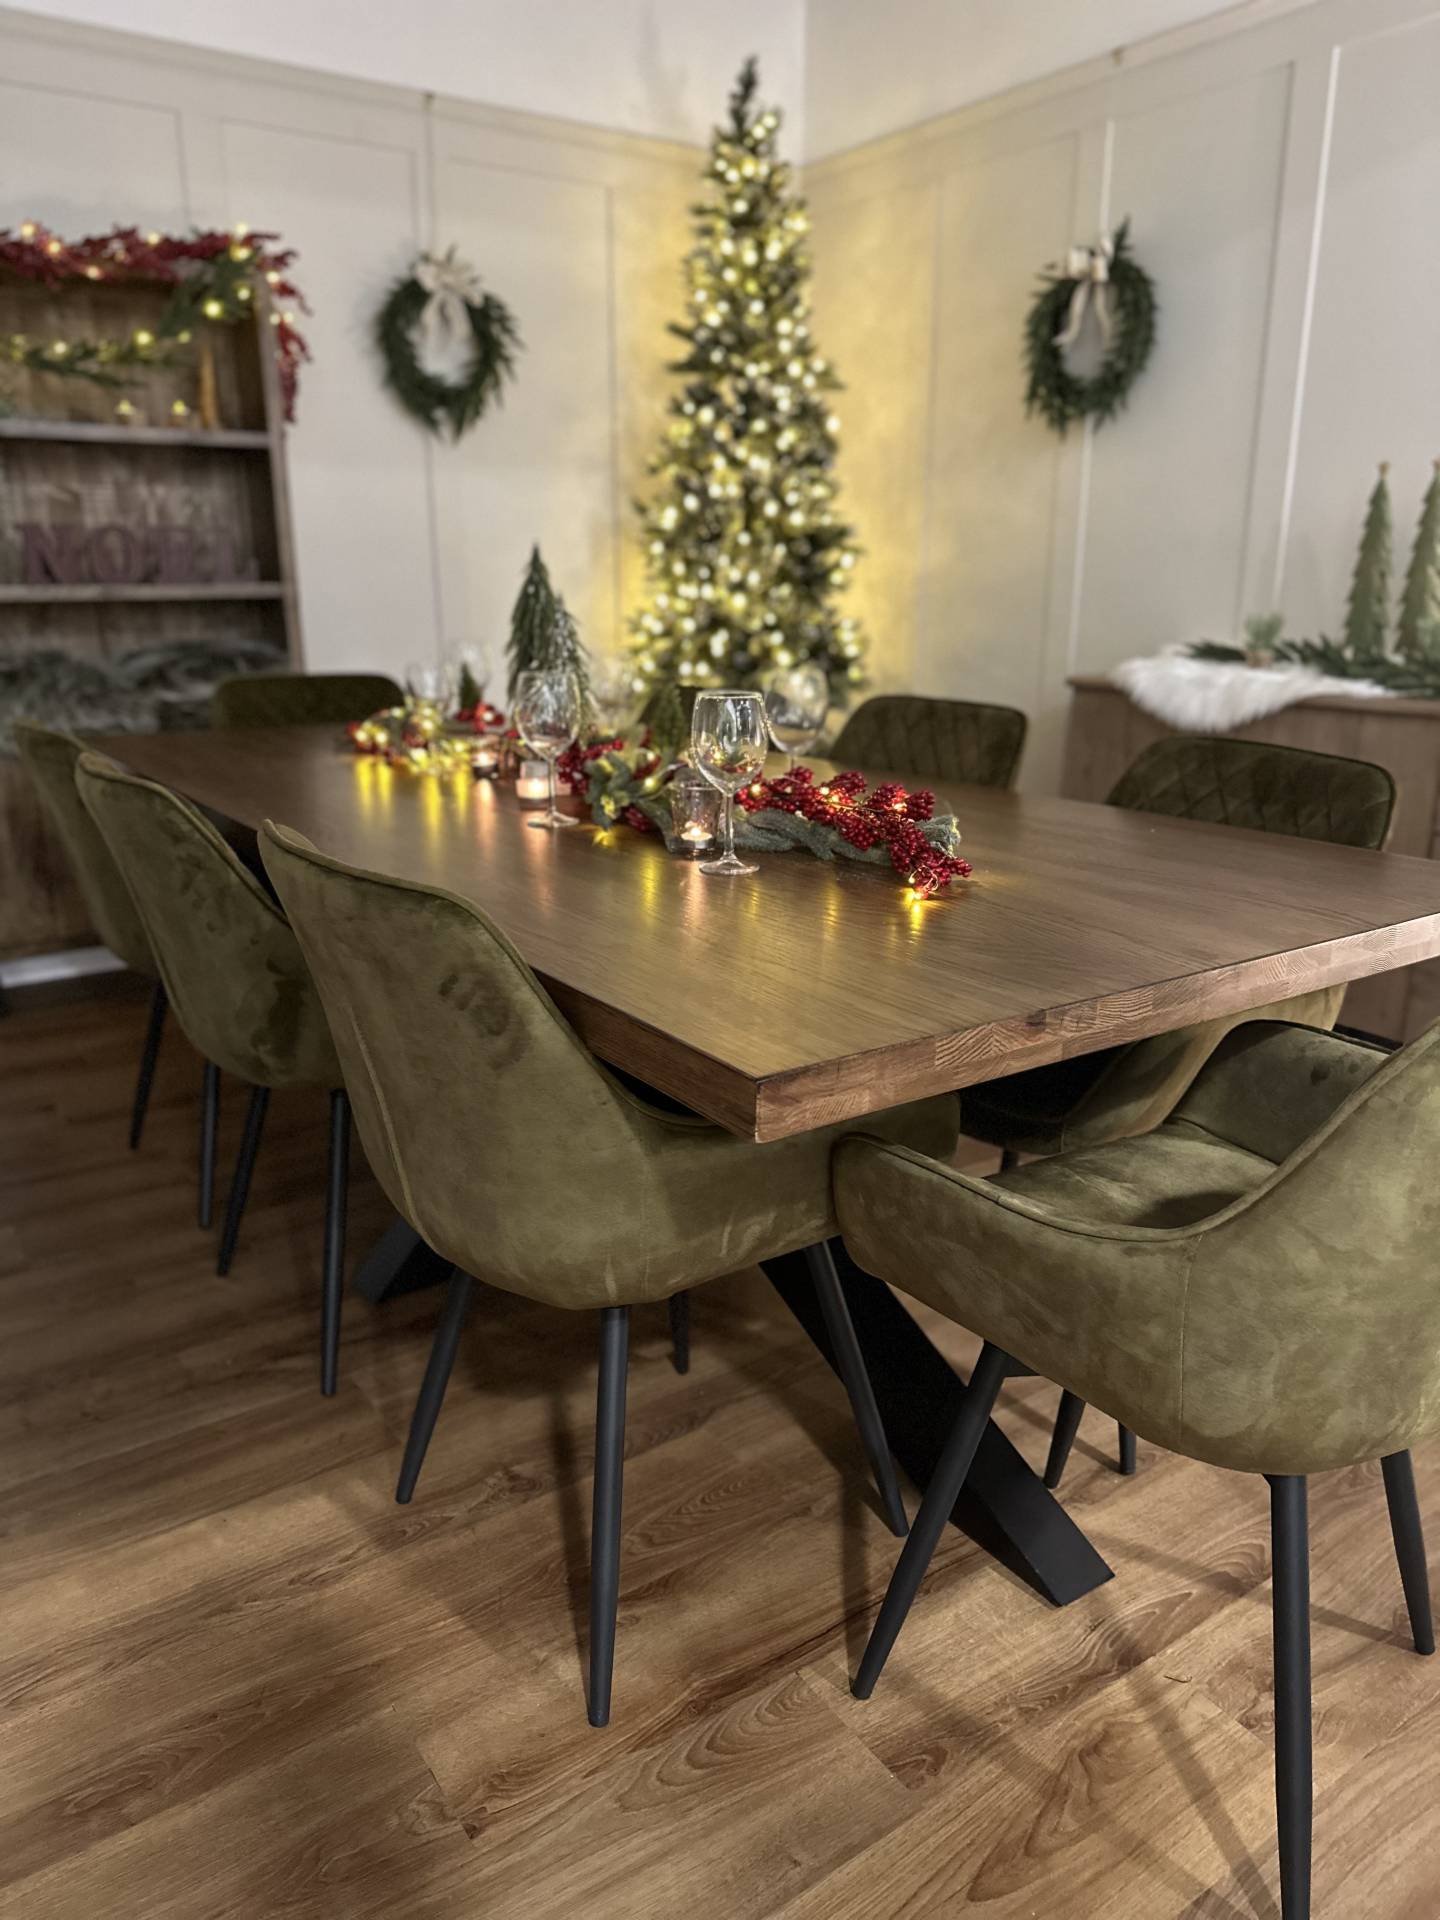 Solid Oak Dining Table & Chairs Set for Christmas